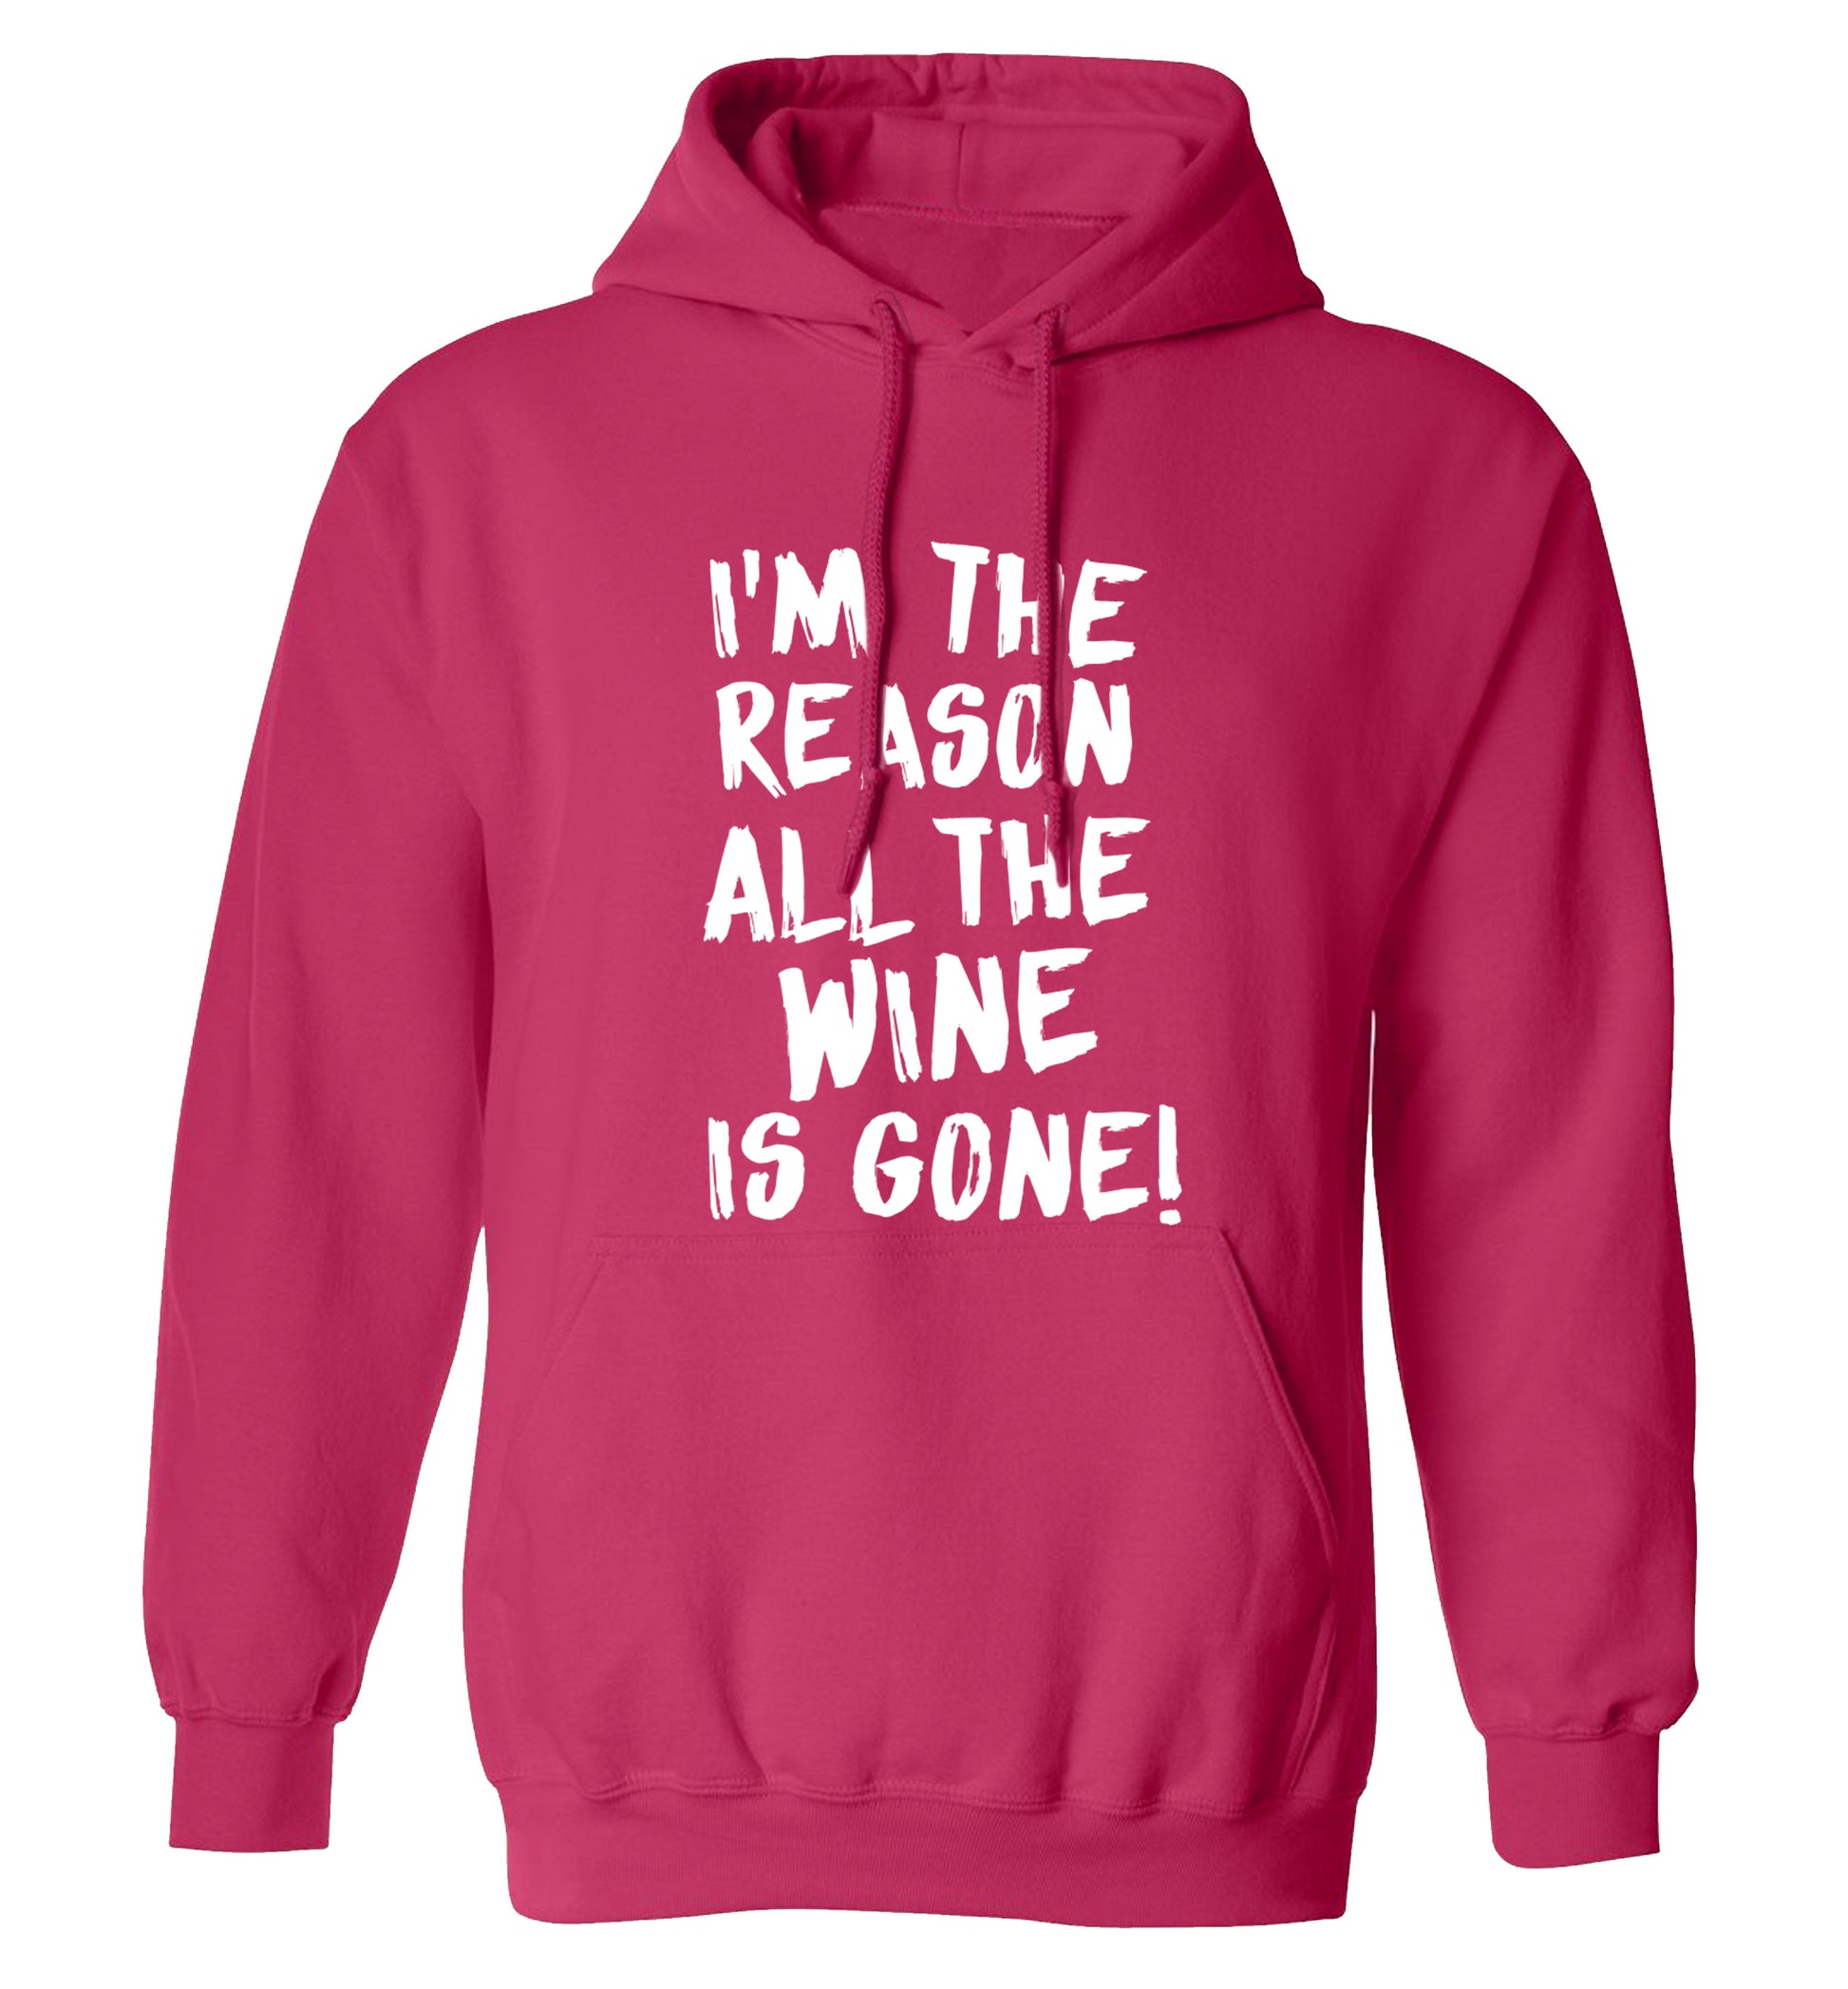 I'm the reason all the wine is gone adults unisex pink hoodie 2XL